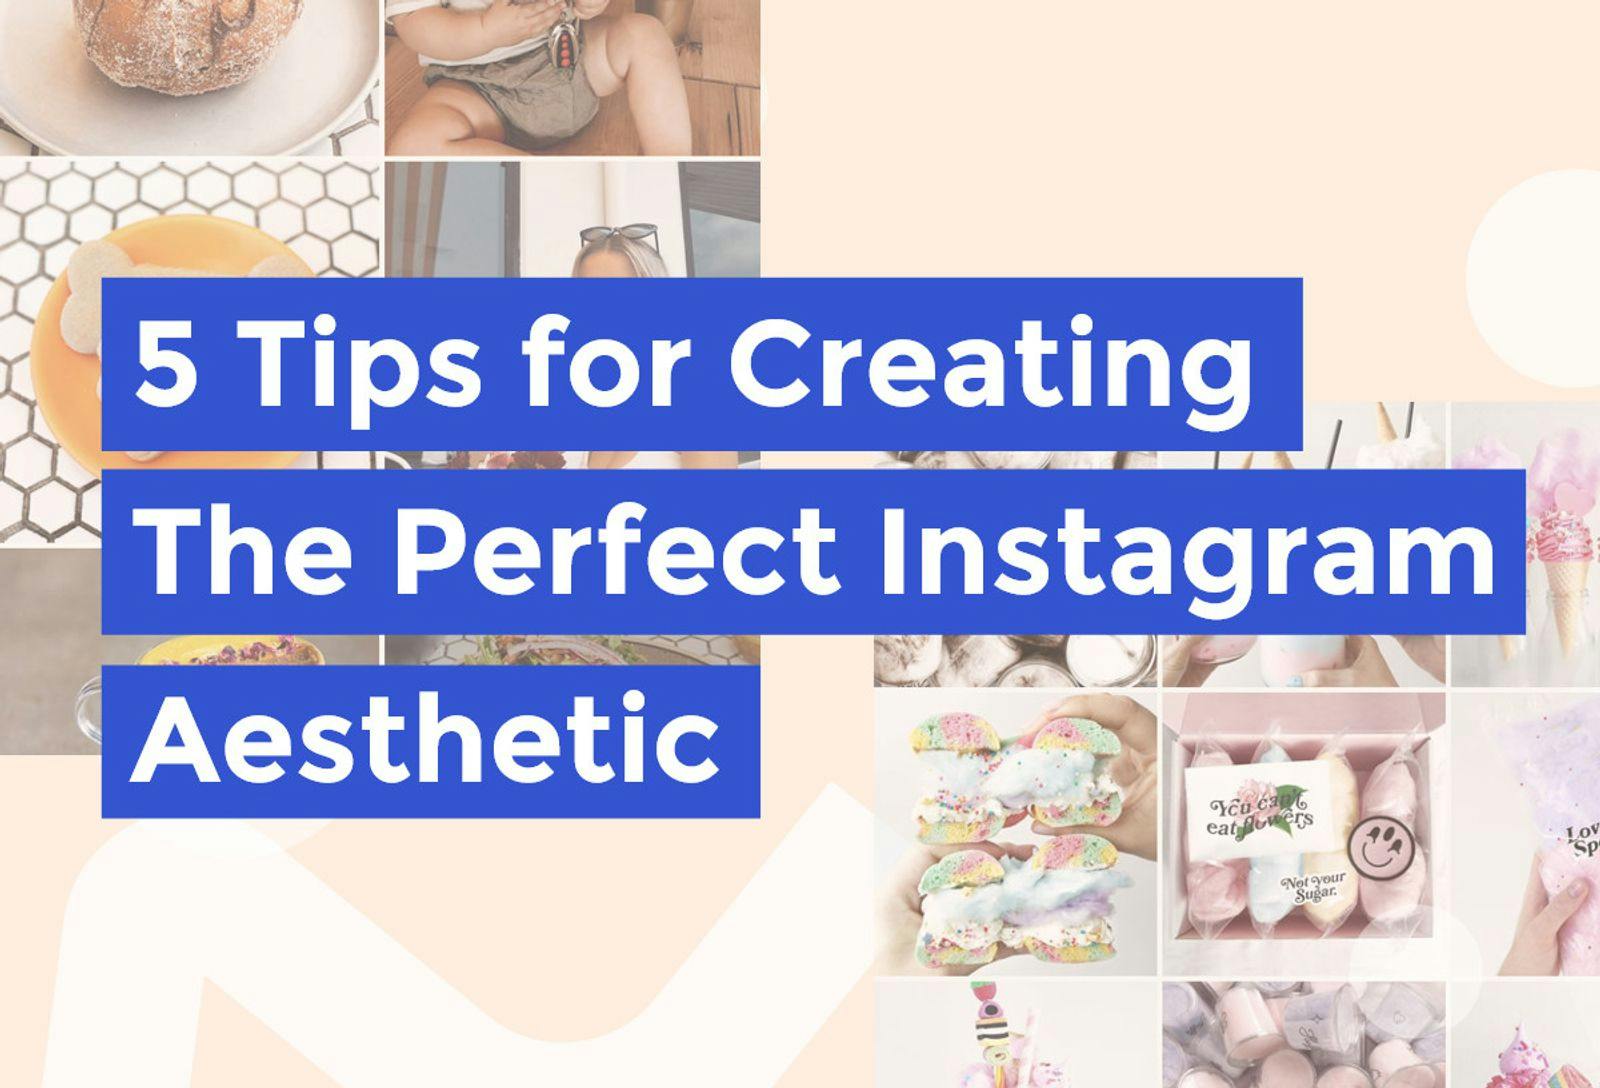 5 tips for creating the perfect Instagram aesthetic